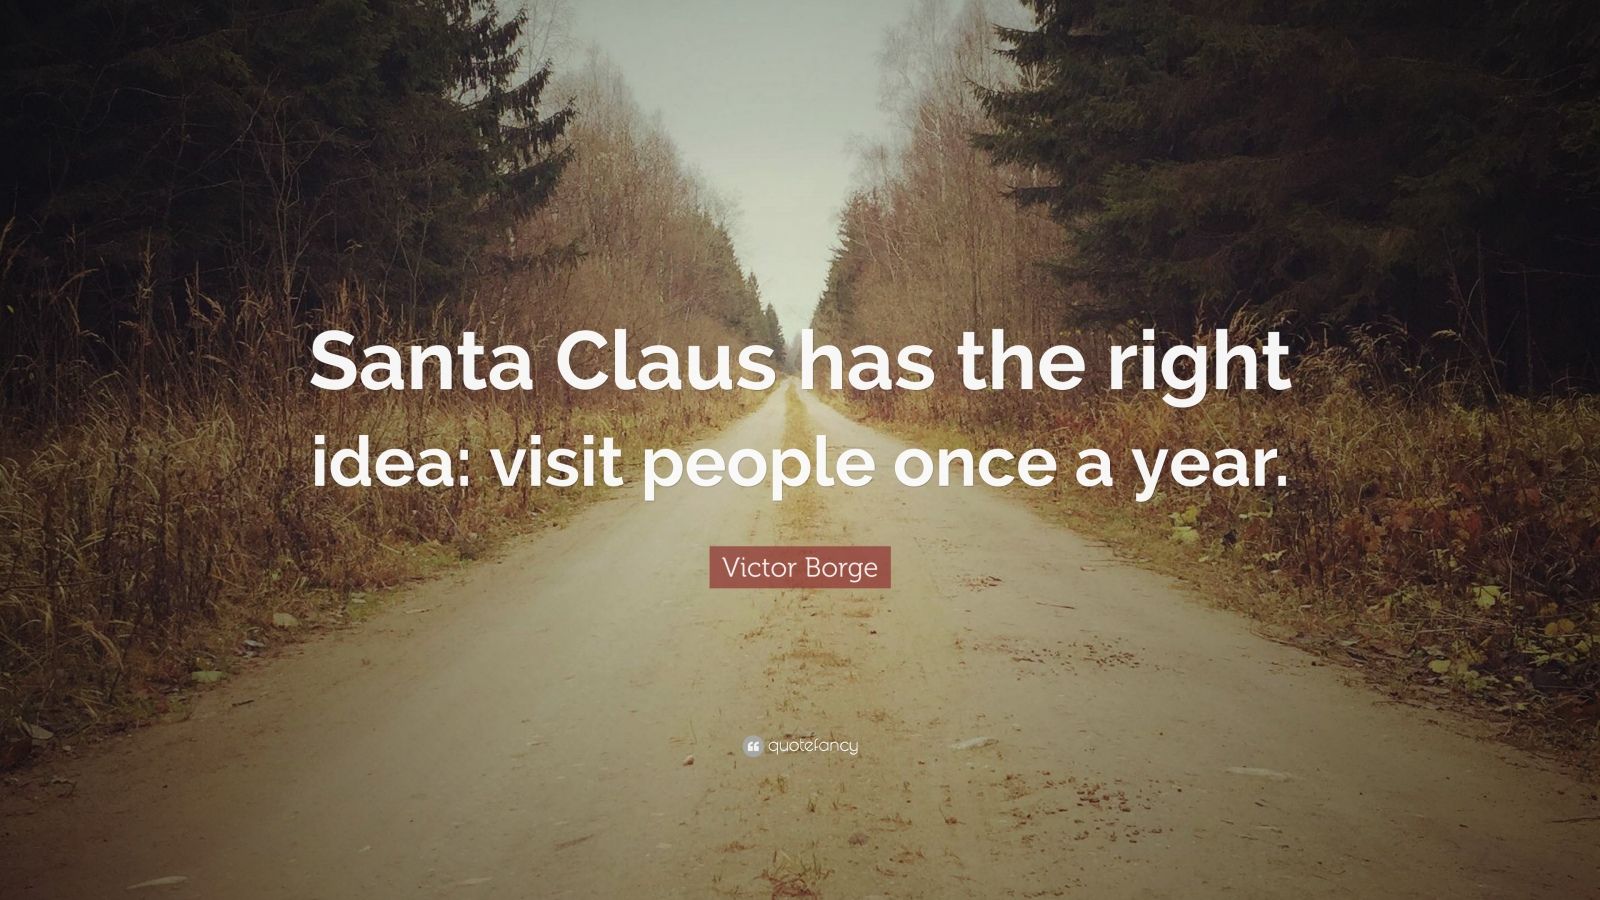 Victor Borge Quote: “Santa Claus has the right idea: visit people once ...